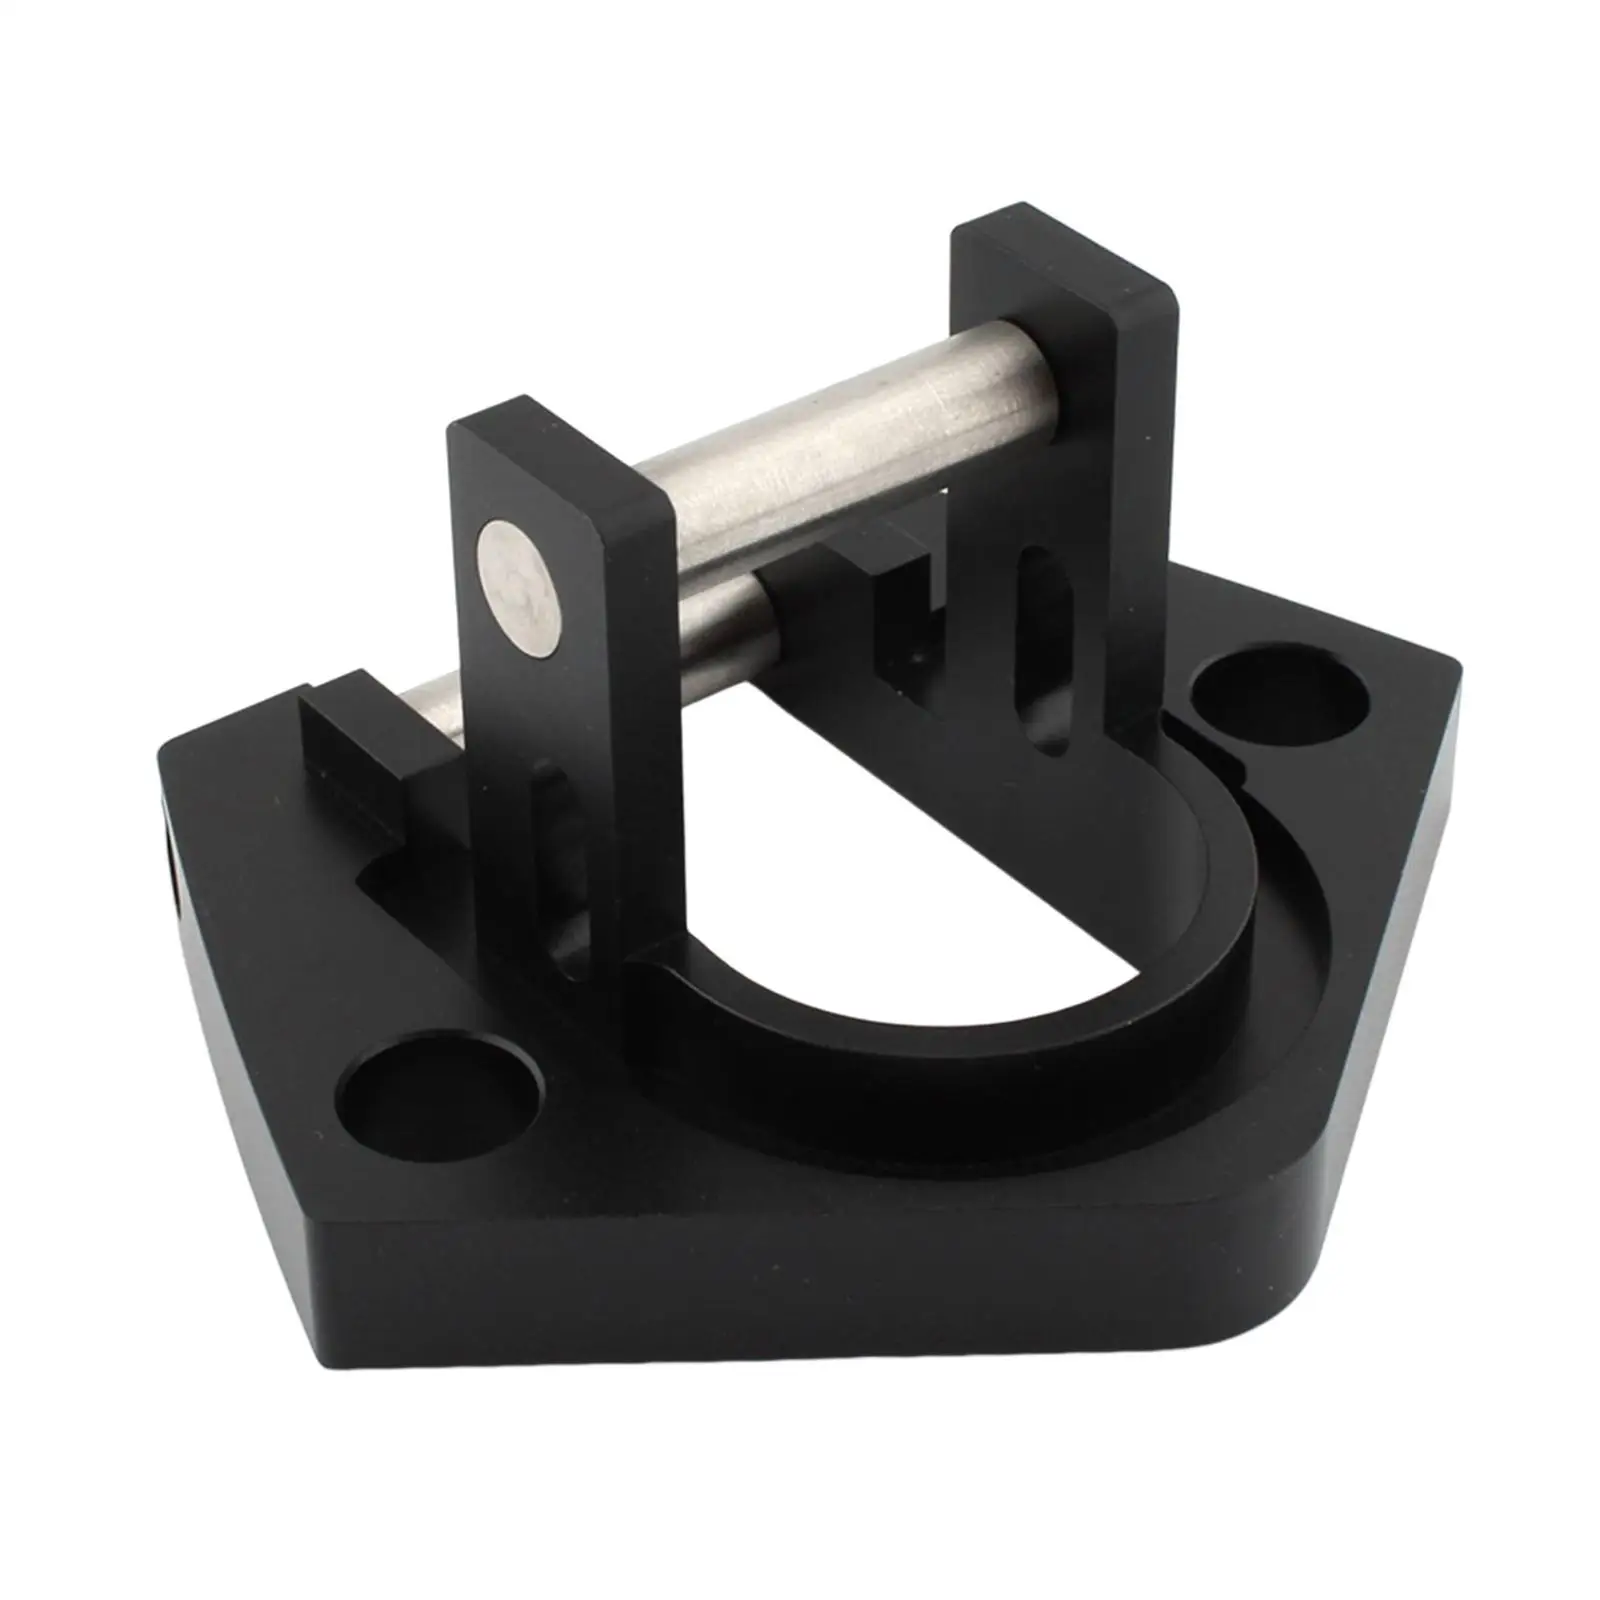 RV Trailer Camper Bottom Mounting Bracket Foot Assembly for Sunchaser II Aluminum Accessories Professional Easily Install